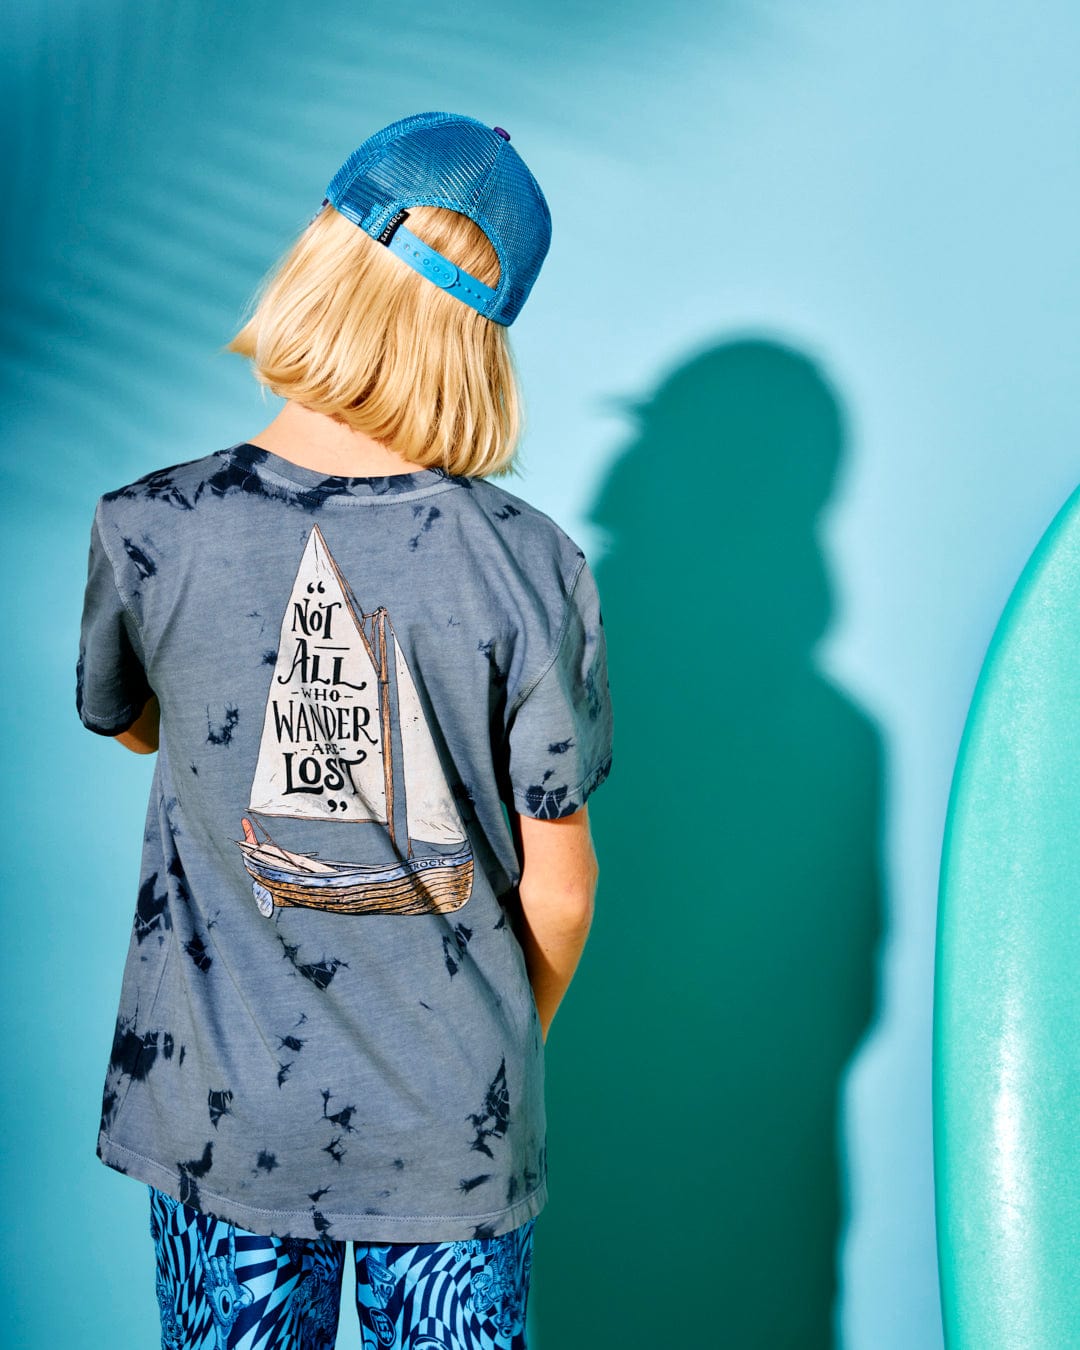 A child wearing a blue tie-dye Lost Ships - Kids Short Sleeve T-Shirt from Saltrock with a sailboat graphic and the text "Not All Who Wander Are Lost" on the back. The child is also wearing a blue cap and stands beside a turquoise surfboard against a blue background.